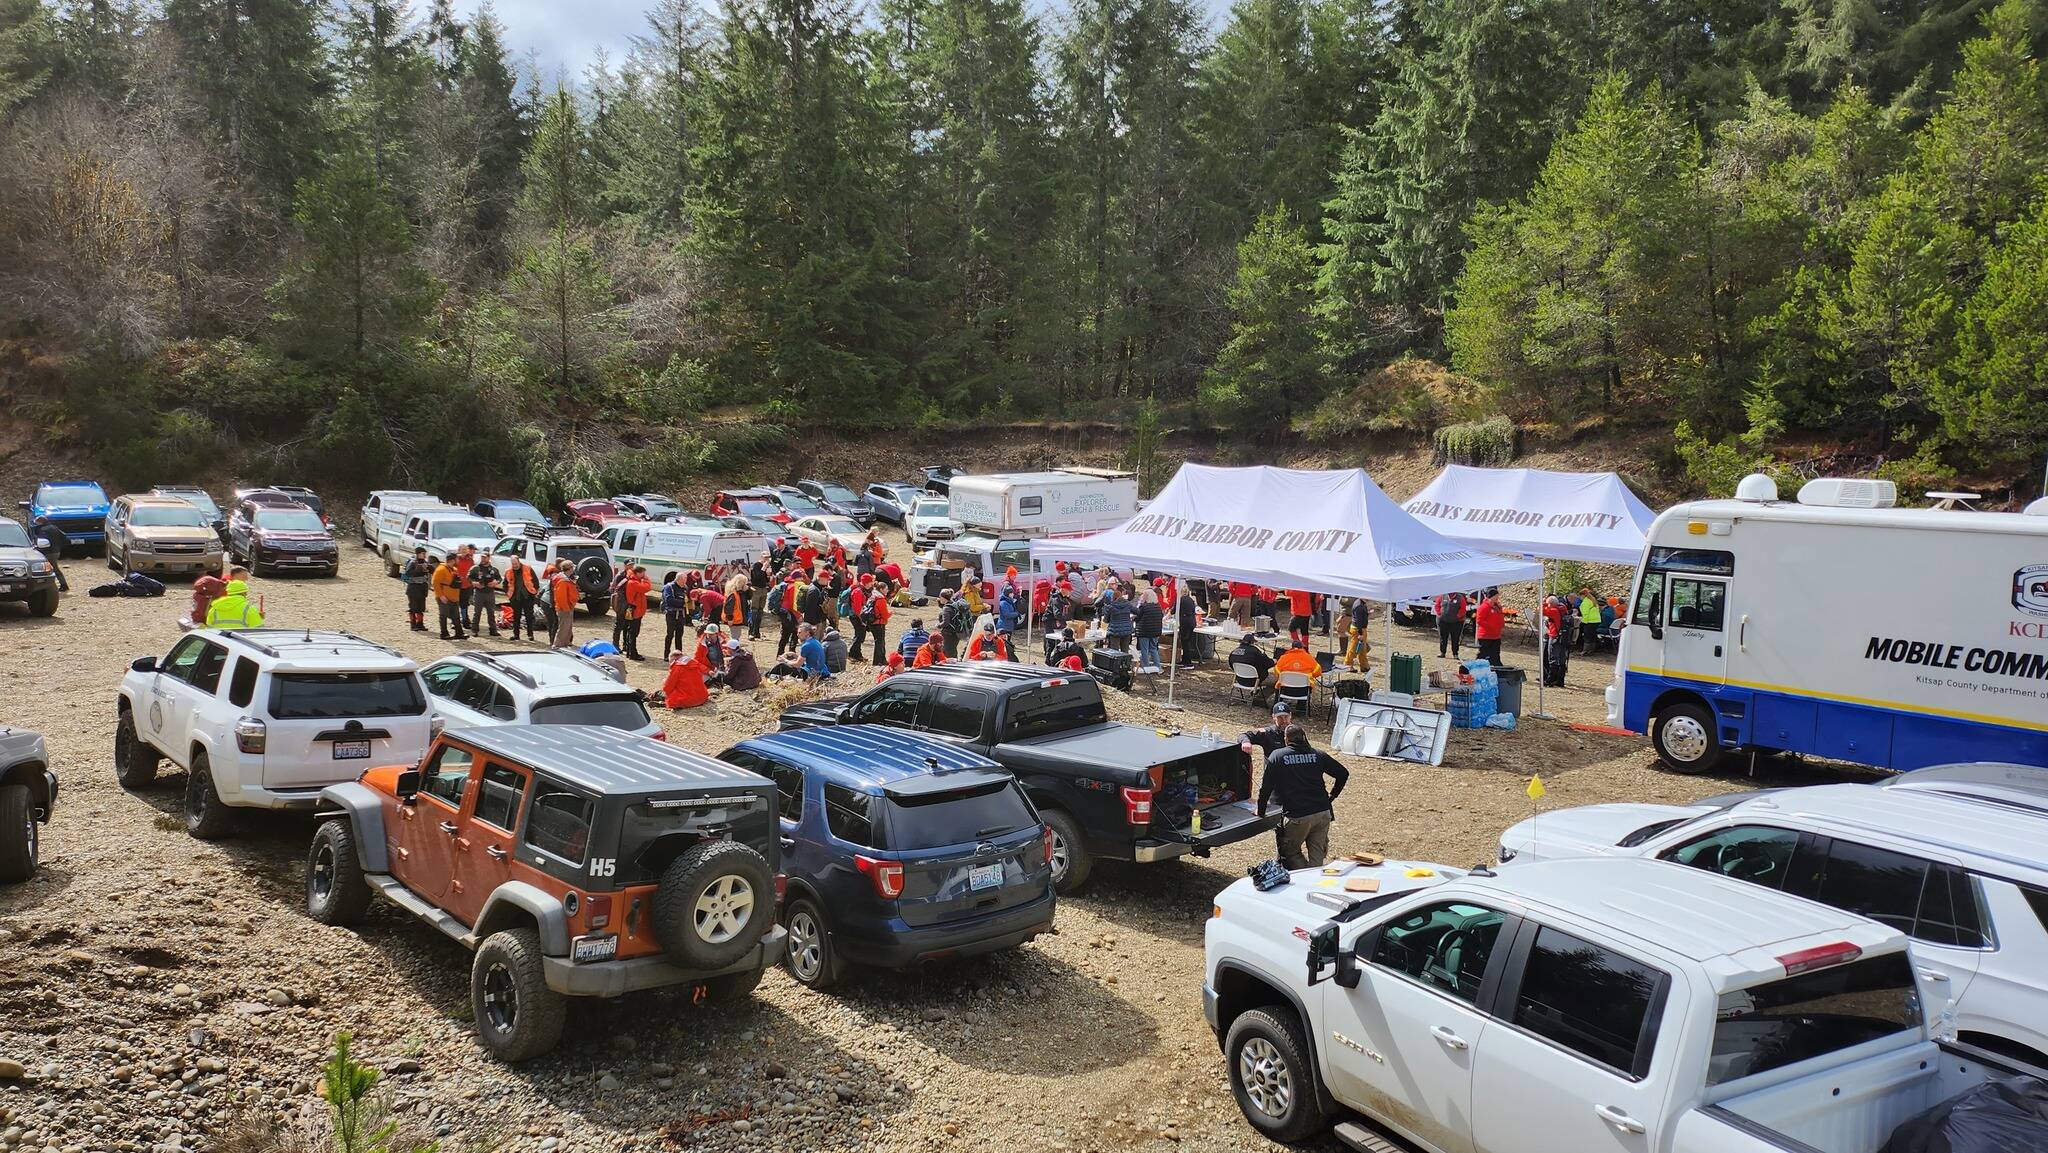 More than a hundred law enforcement personnel and volunteers took part in a sweep for evidence in the case of the 2009 disappearance of Lindsey Baum in a rural part of Mason County on April 25-26. (Courtesy photo / Grays Harbor County Sheriff’s Office)